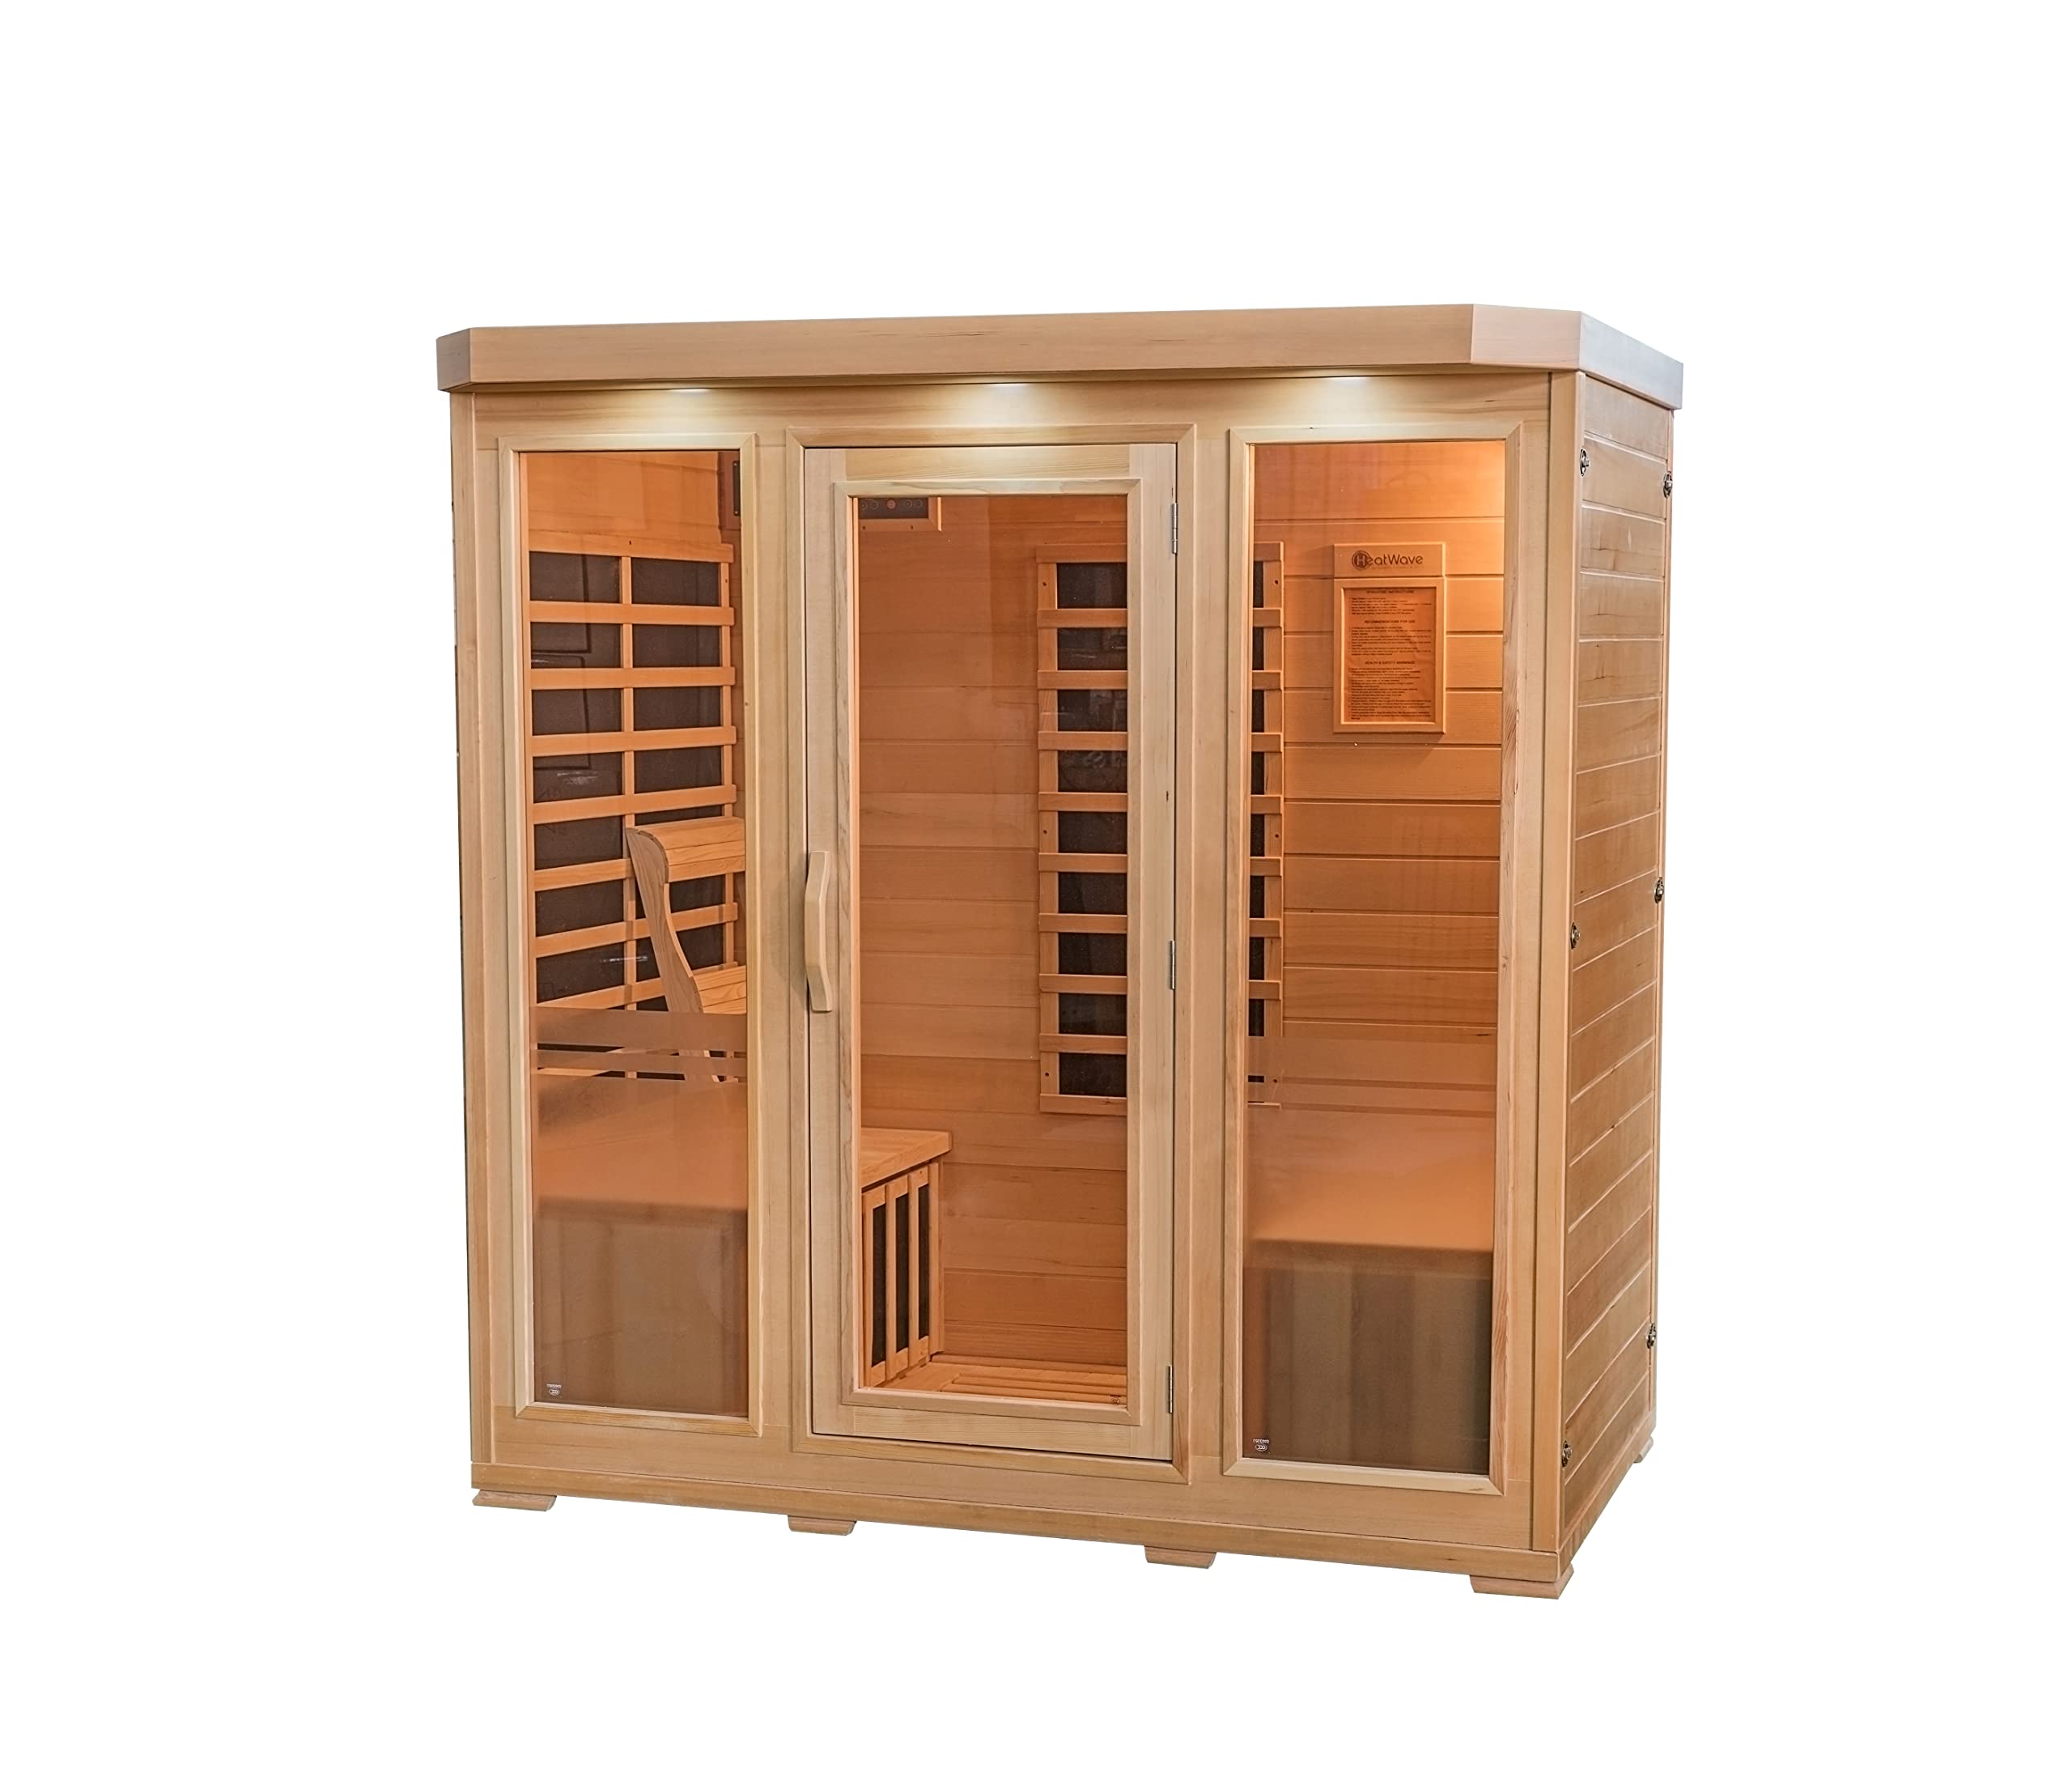 Heat Wave 4 Person Sauna Hemlock Wood Sonoma 9 Carbon Infrared Heaters MP3 Player Chromo Therapy Lighting 120V 2100W